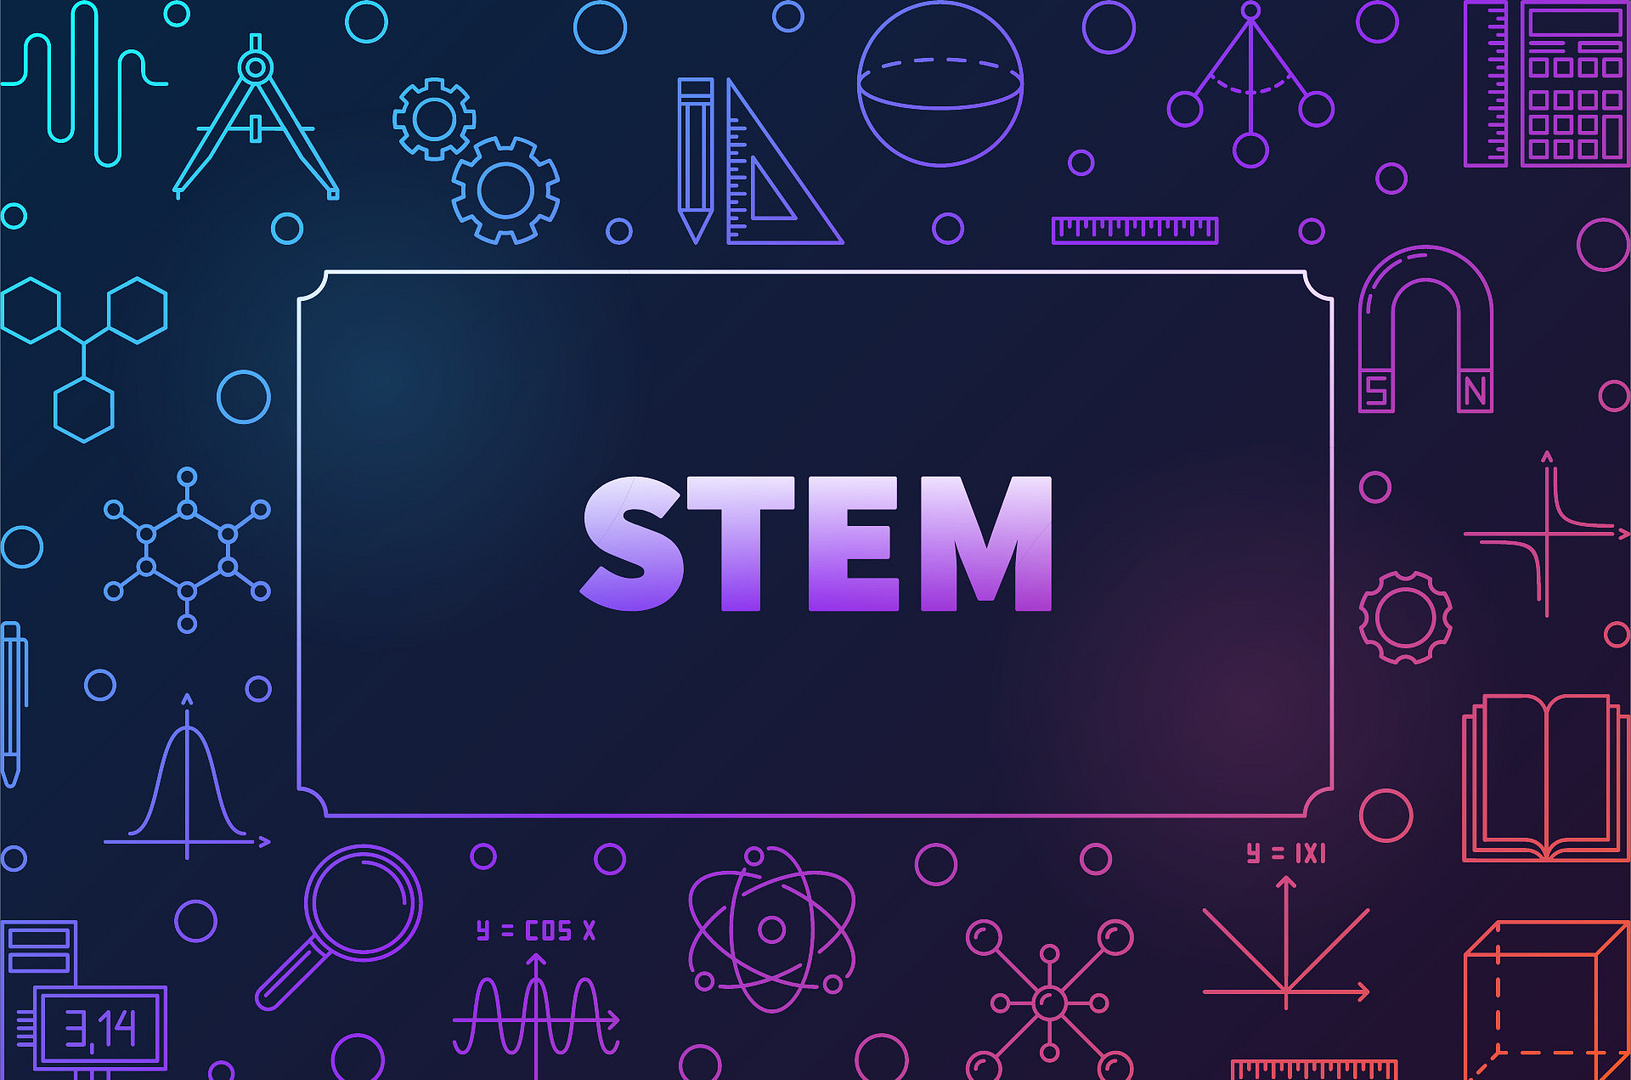 The word 'STEM' in capital letters is surrounded by a variety of small science related symbols.